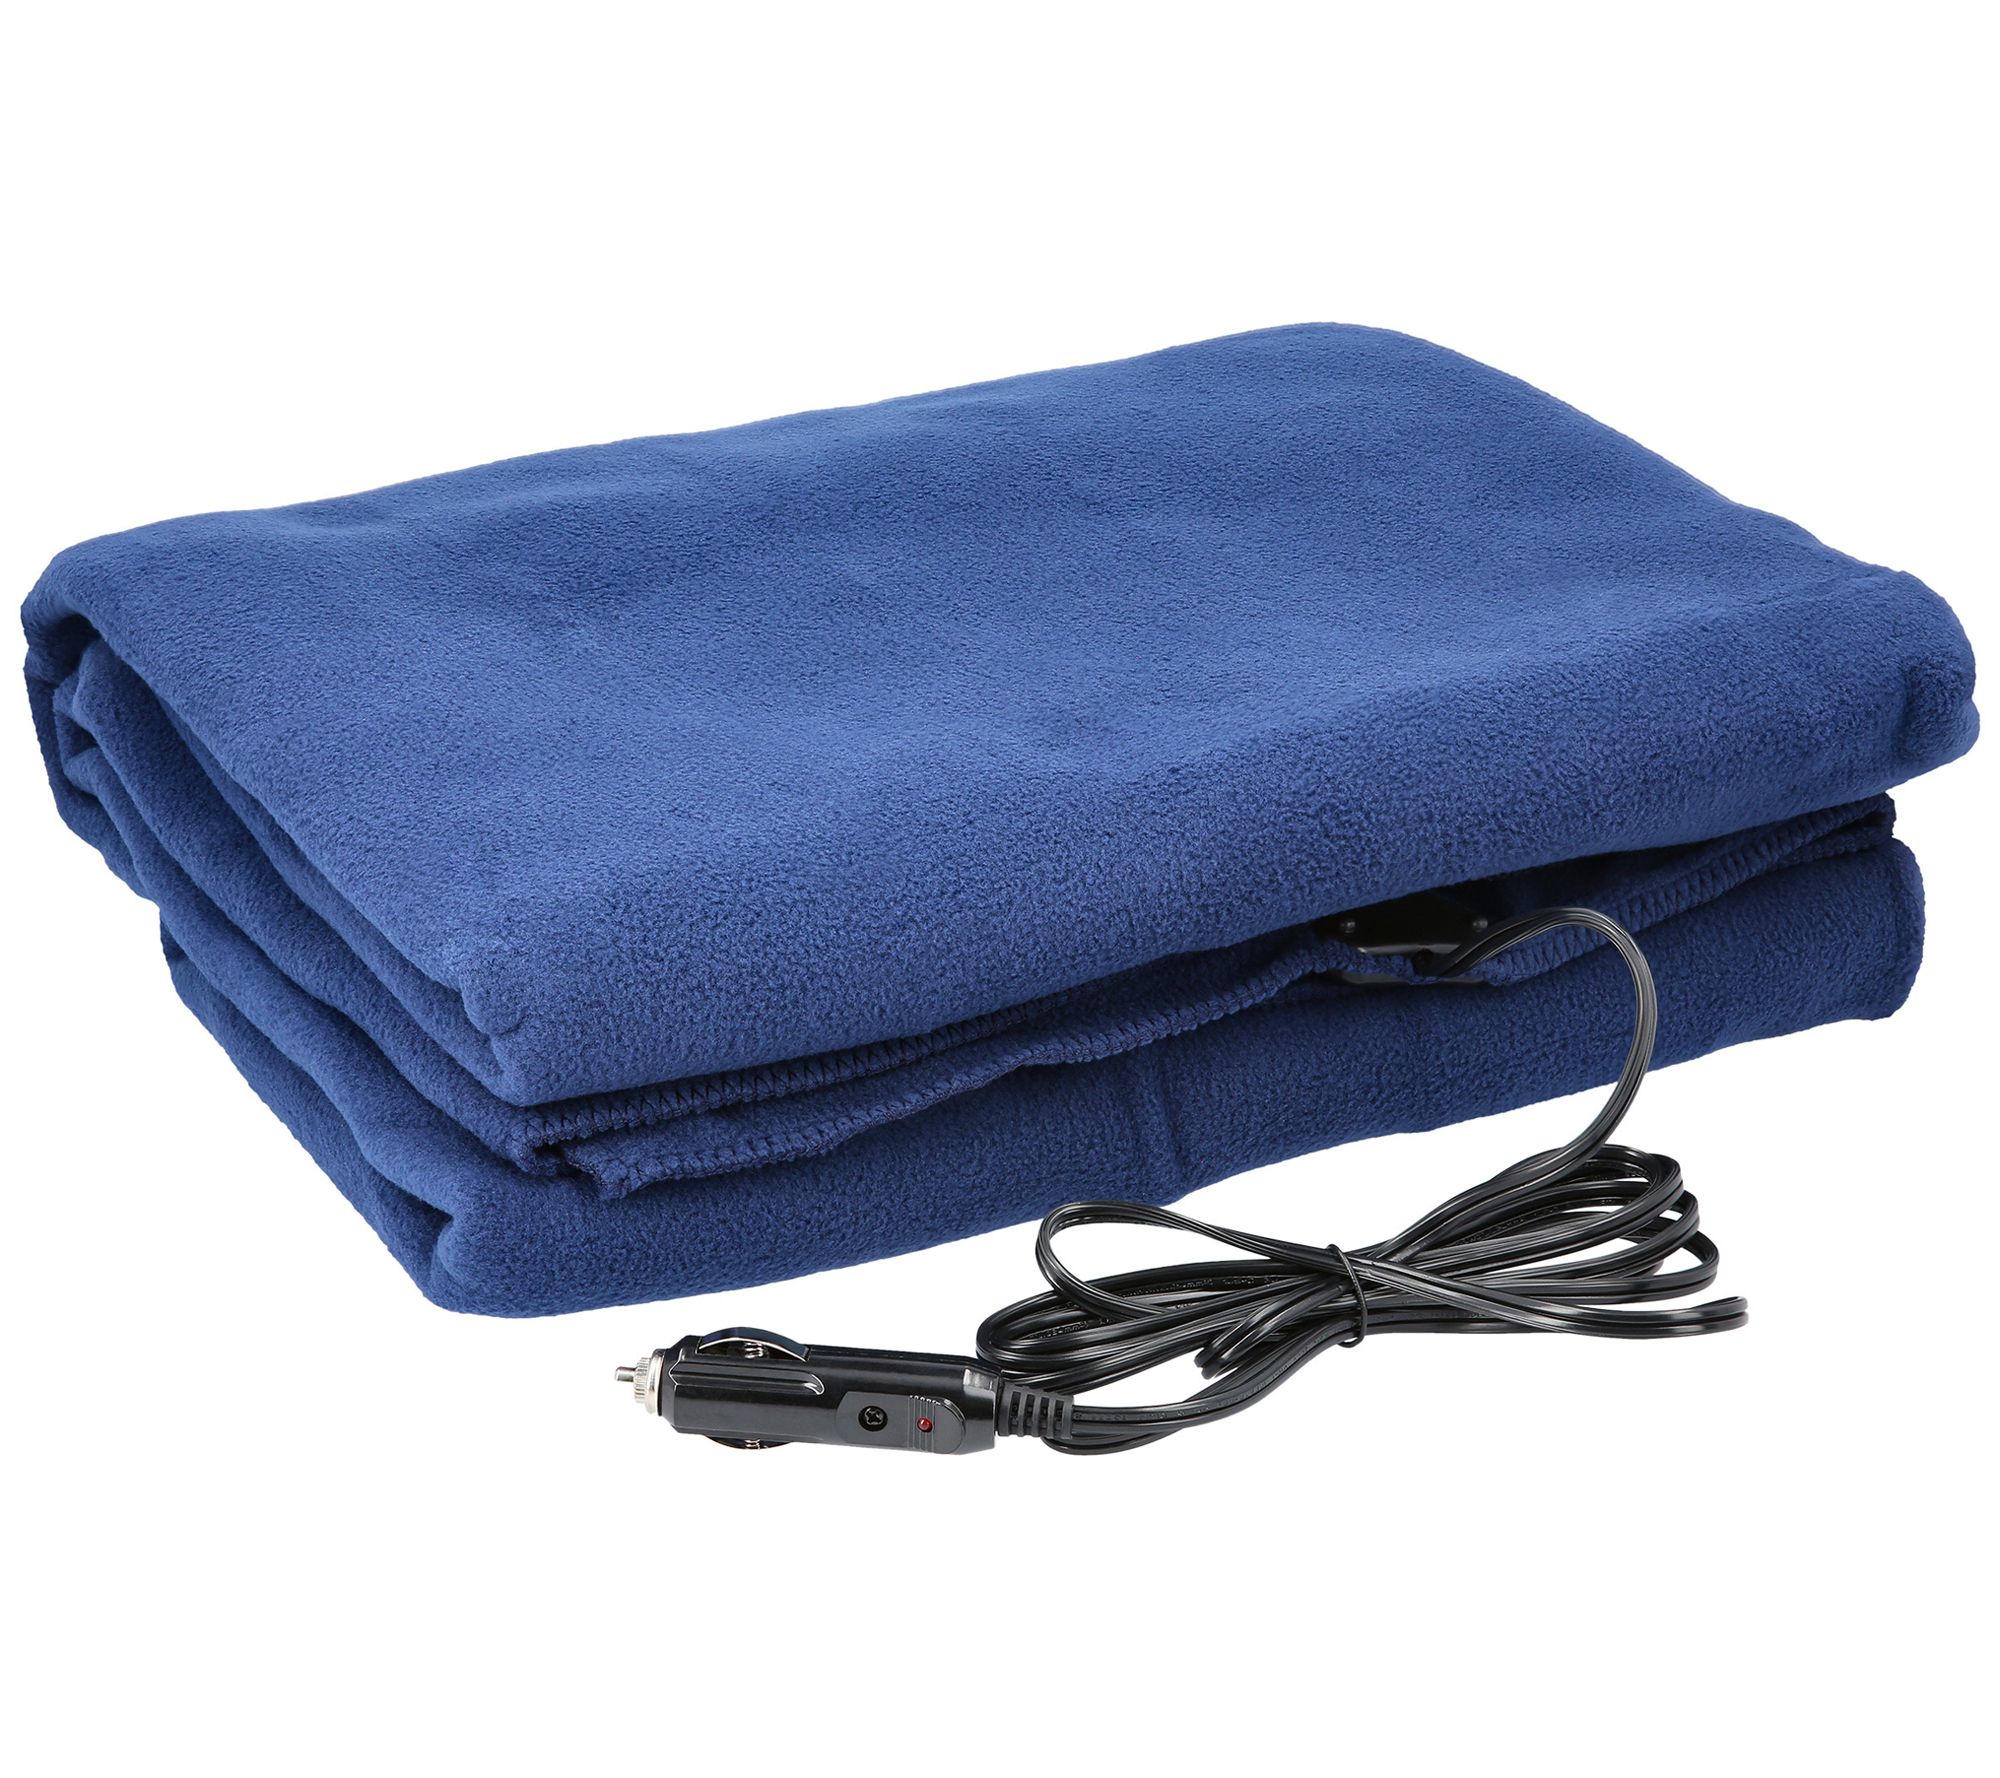 Warm Winter Electric Smart Controller Heating Blanket Portable